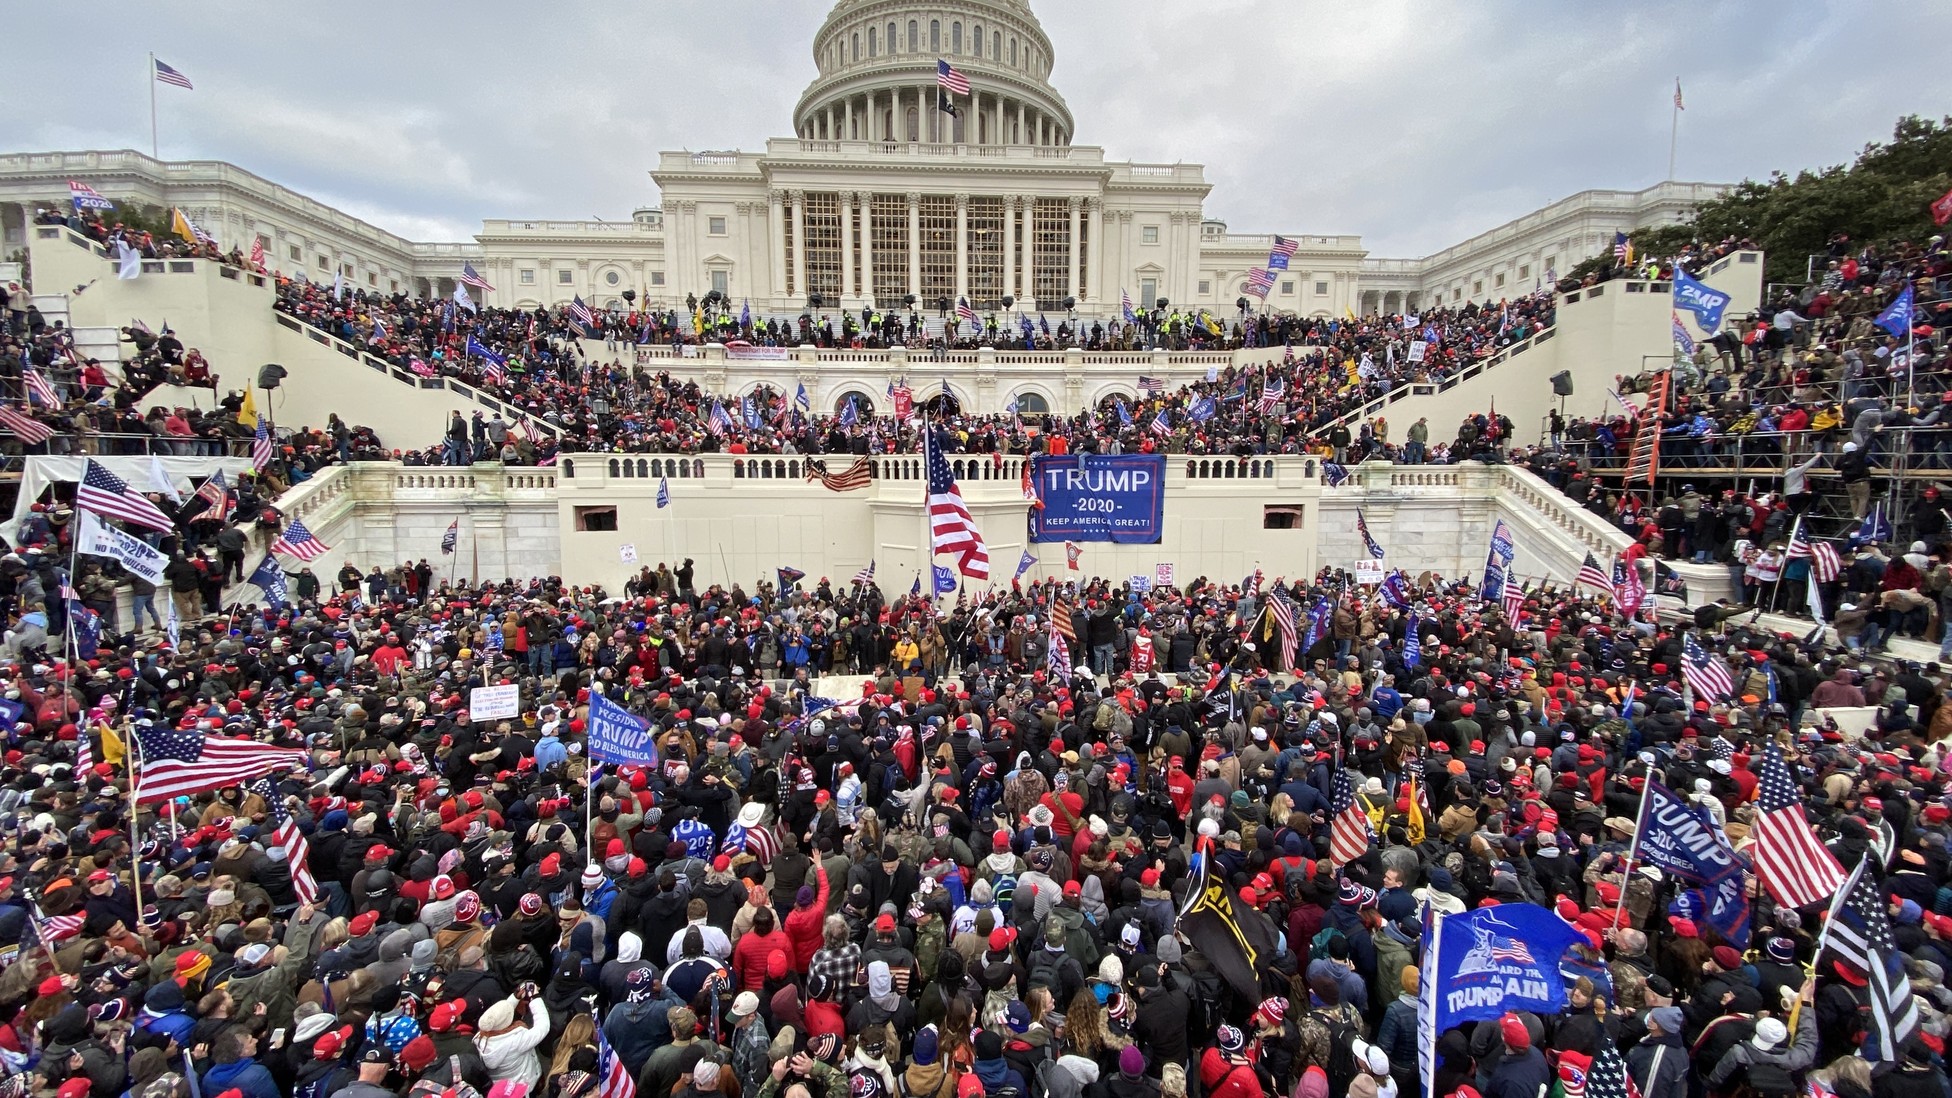 A photograph of hundreds of people gathered outside the U.S Capitol, waving American flags and Trump banners.